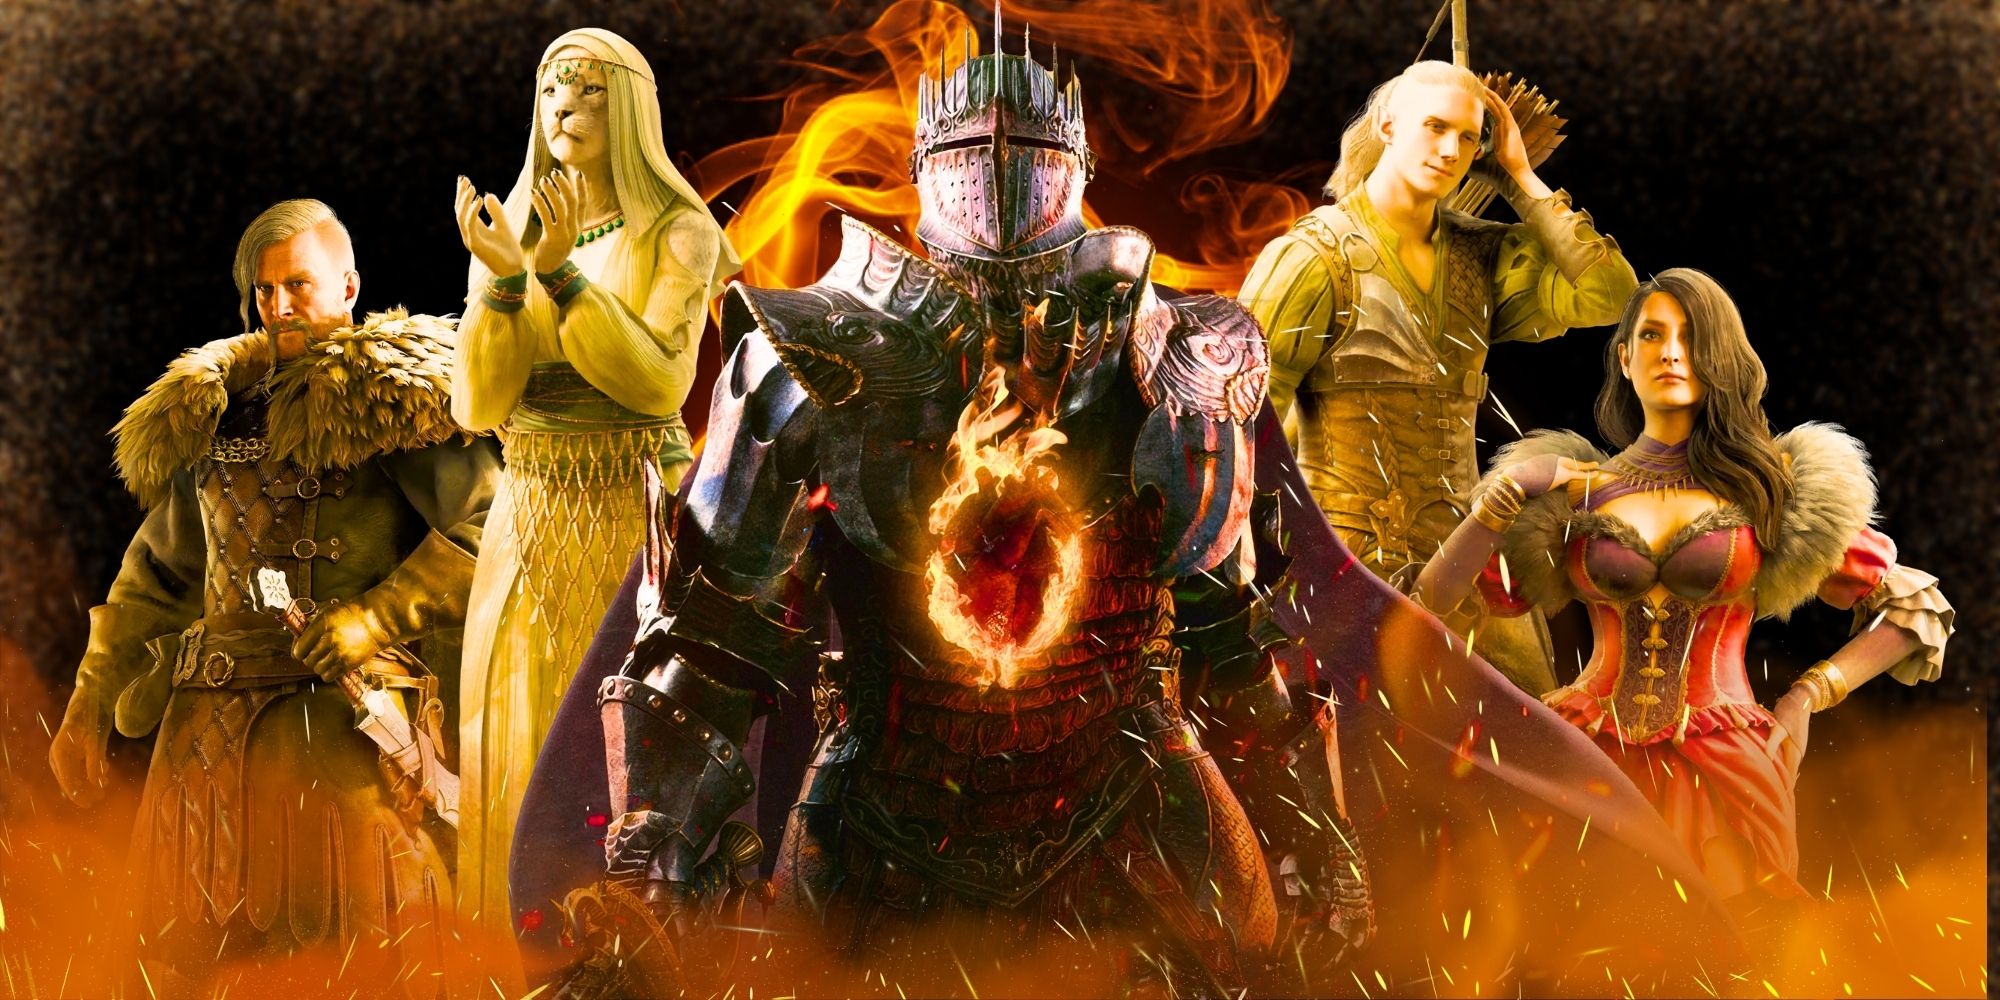 Five characters from Dragon's Dogma, posing around the Arisen in the center, all surrounded by flames.